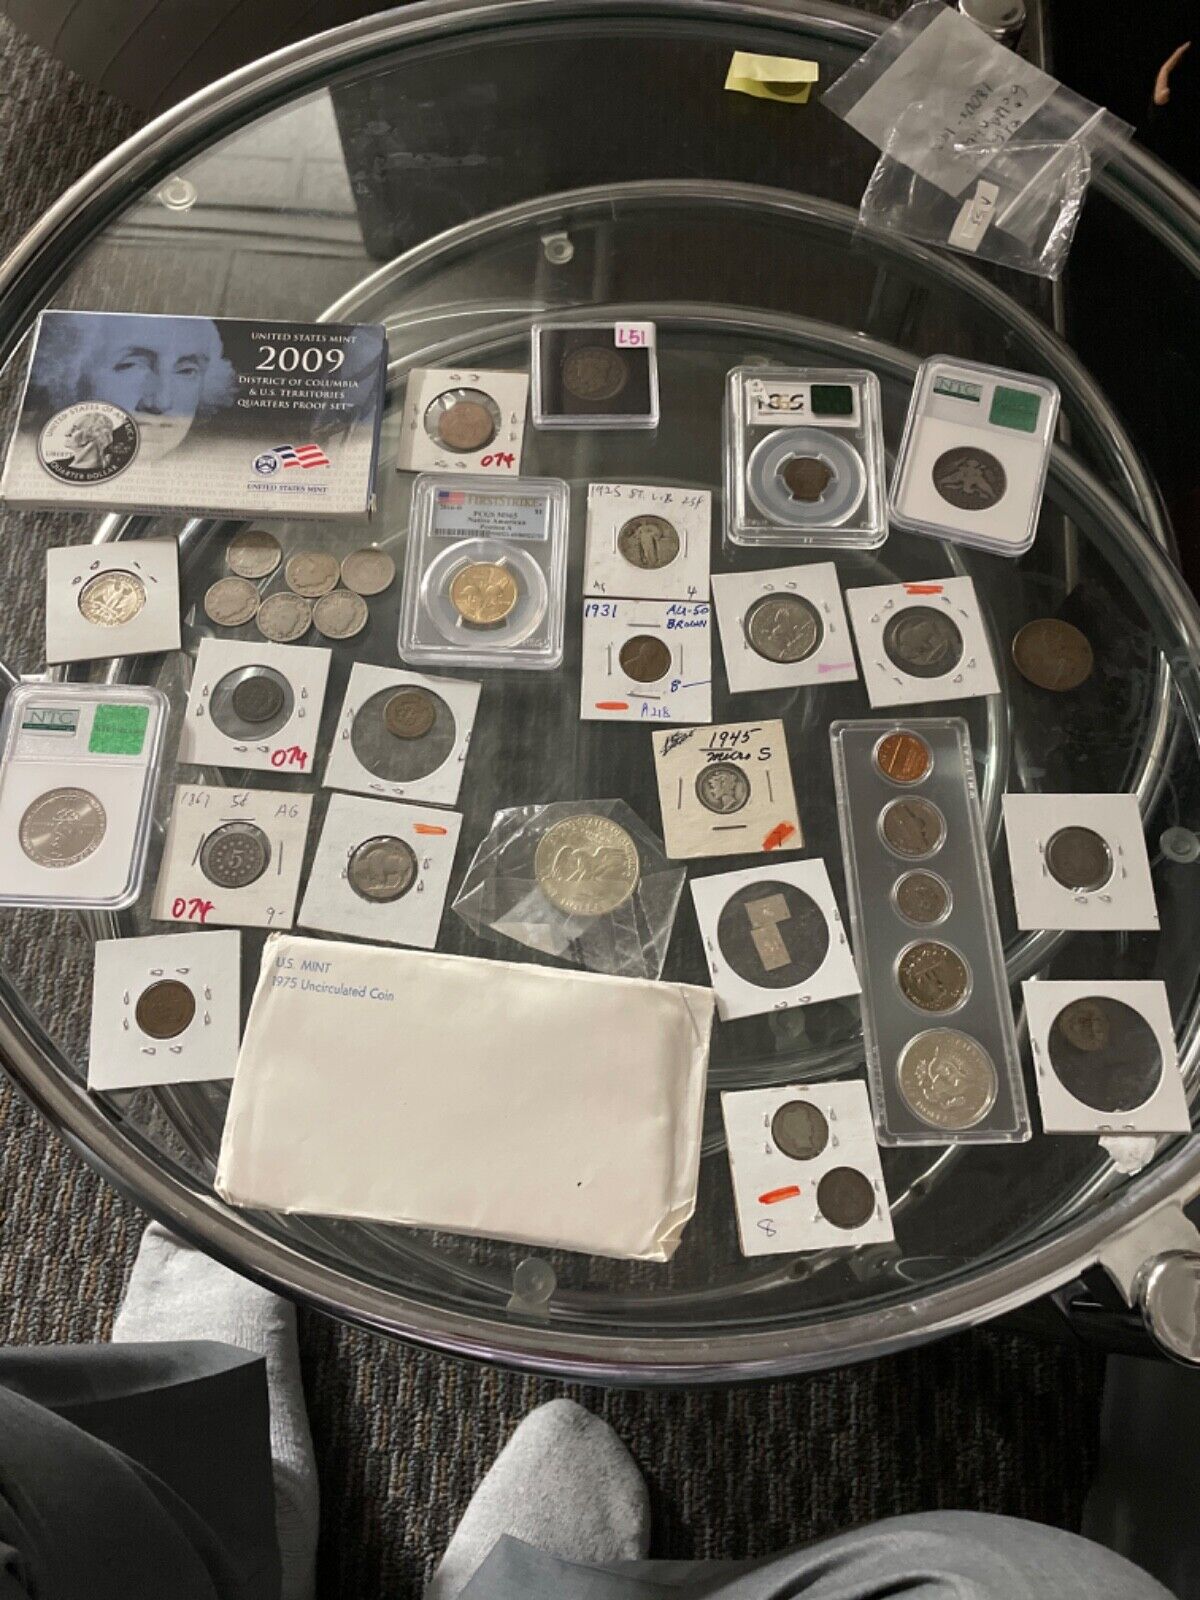 $49 WORLD coin/note grab bags guaranteed to include silver coins! FREE Shipping!